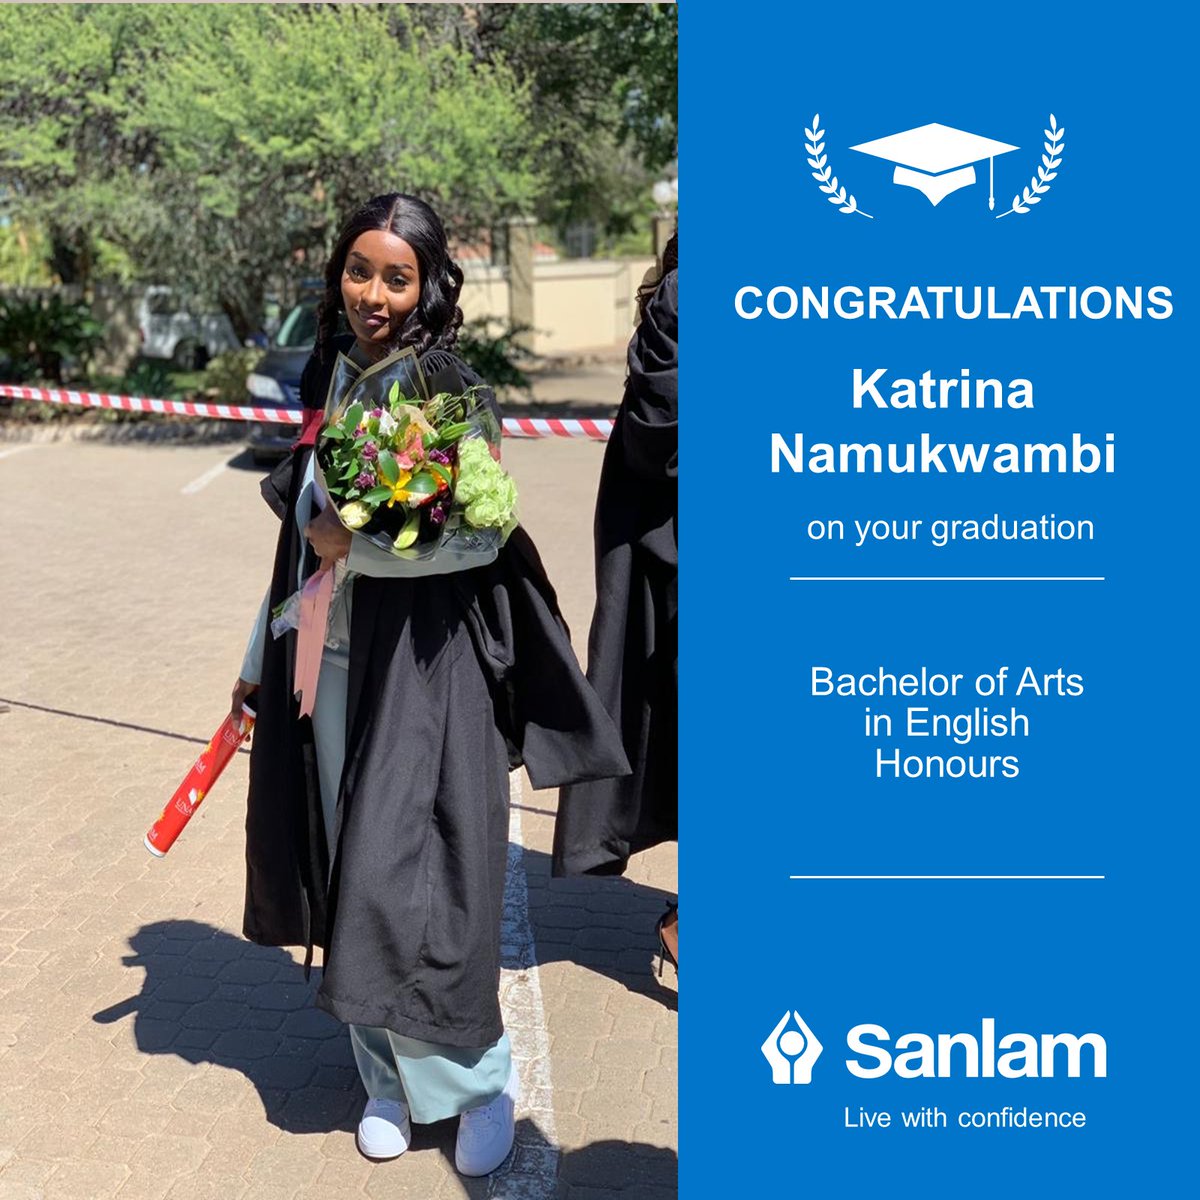 Congratulations to our graduates: Katrina Namukwambi for obtaining your Bachelor of Arts in English and Linguistics Honours, Faith Lubinda for achieving your Bachelor of Law Honours, Brilliant Kavungo for earning your Bachelor of Law Honours, and Azaria Wallace for completing